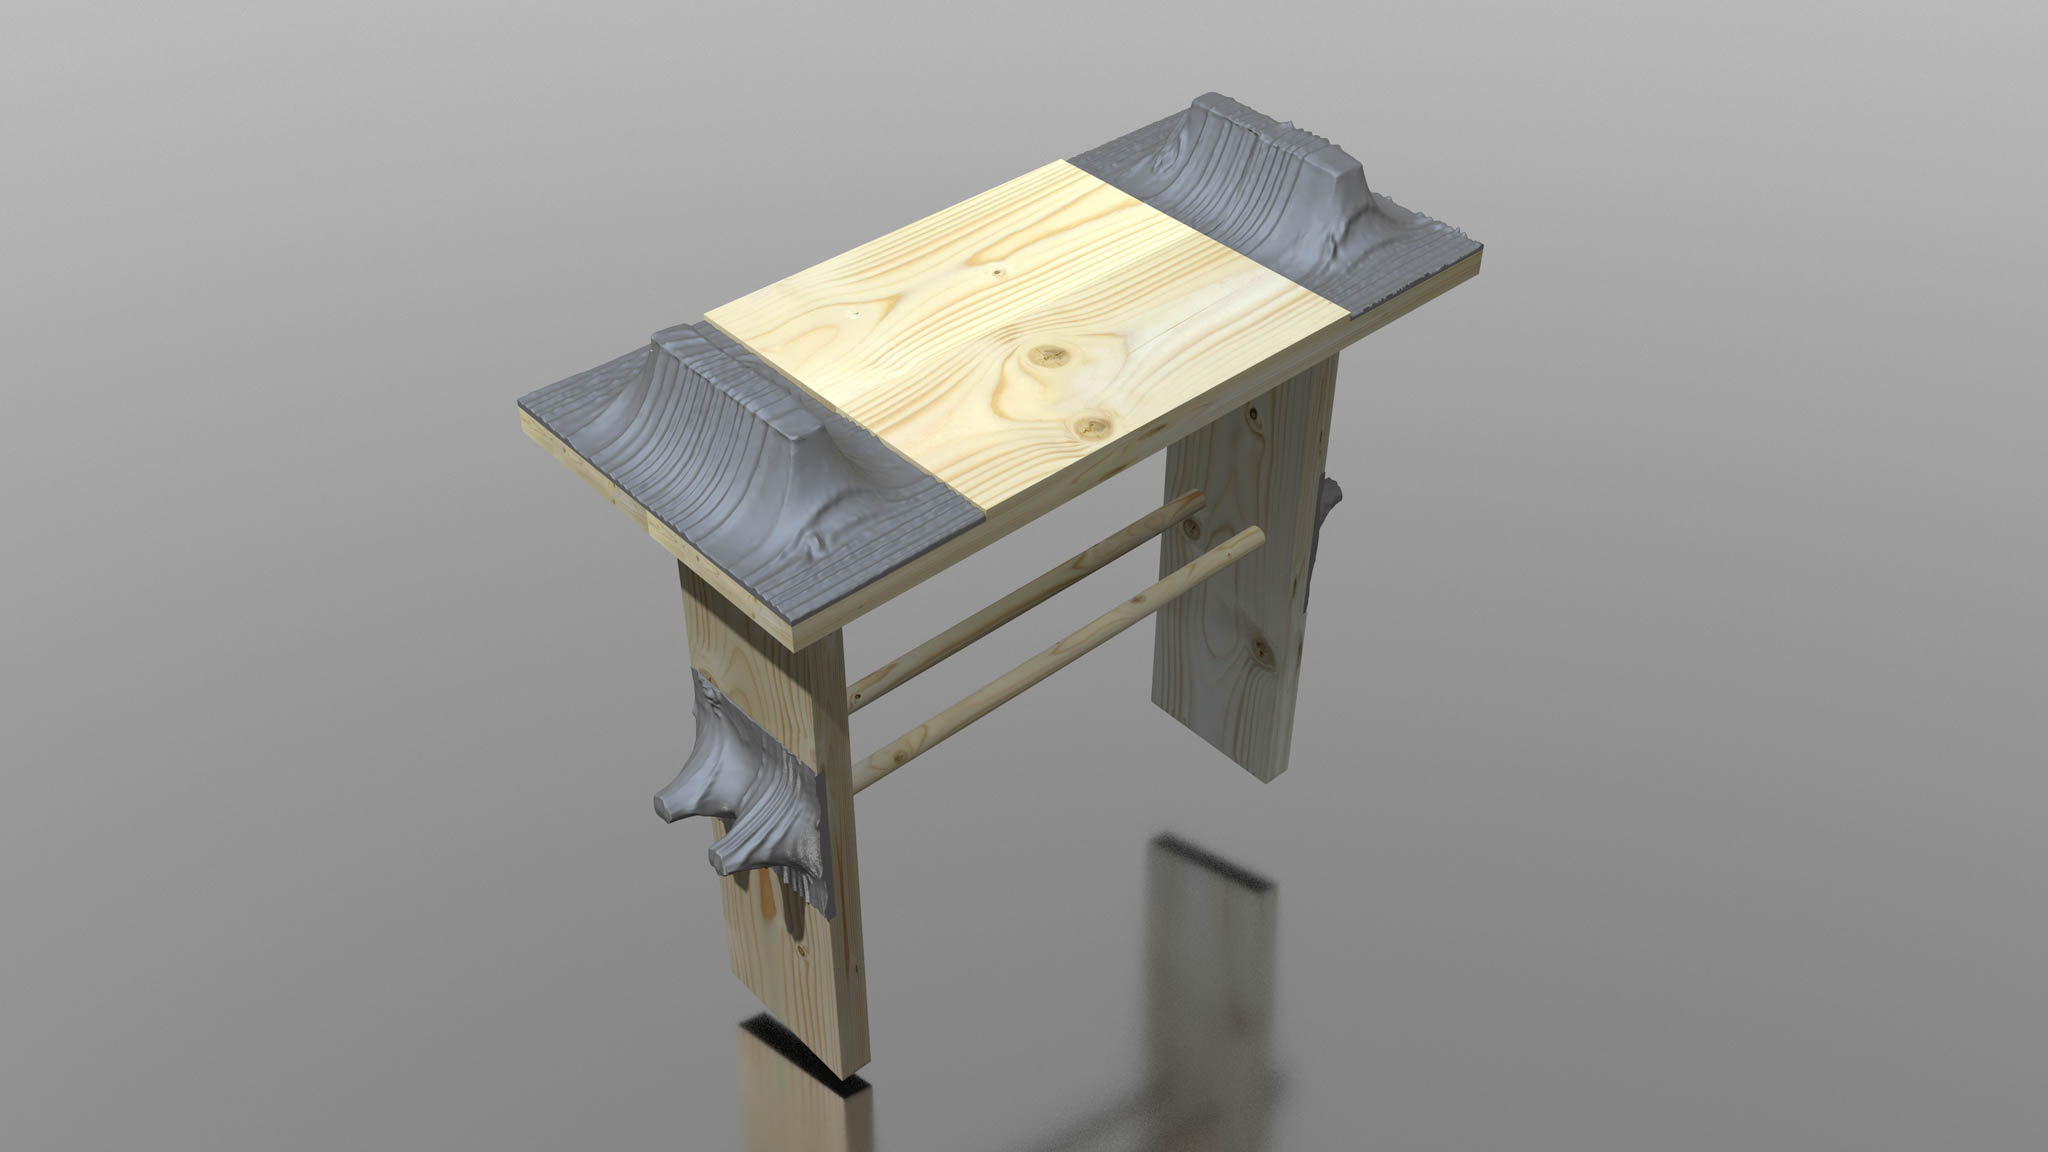 render of stretched wooden bench